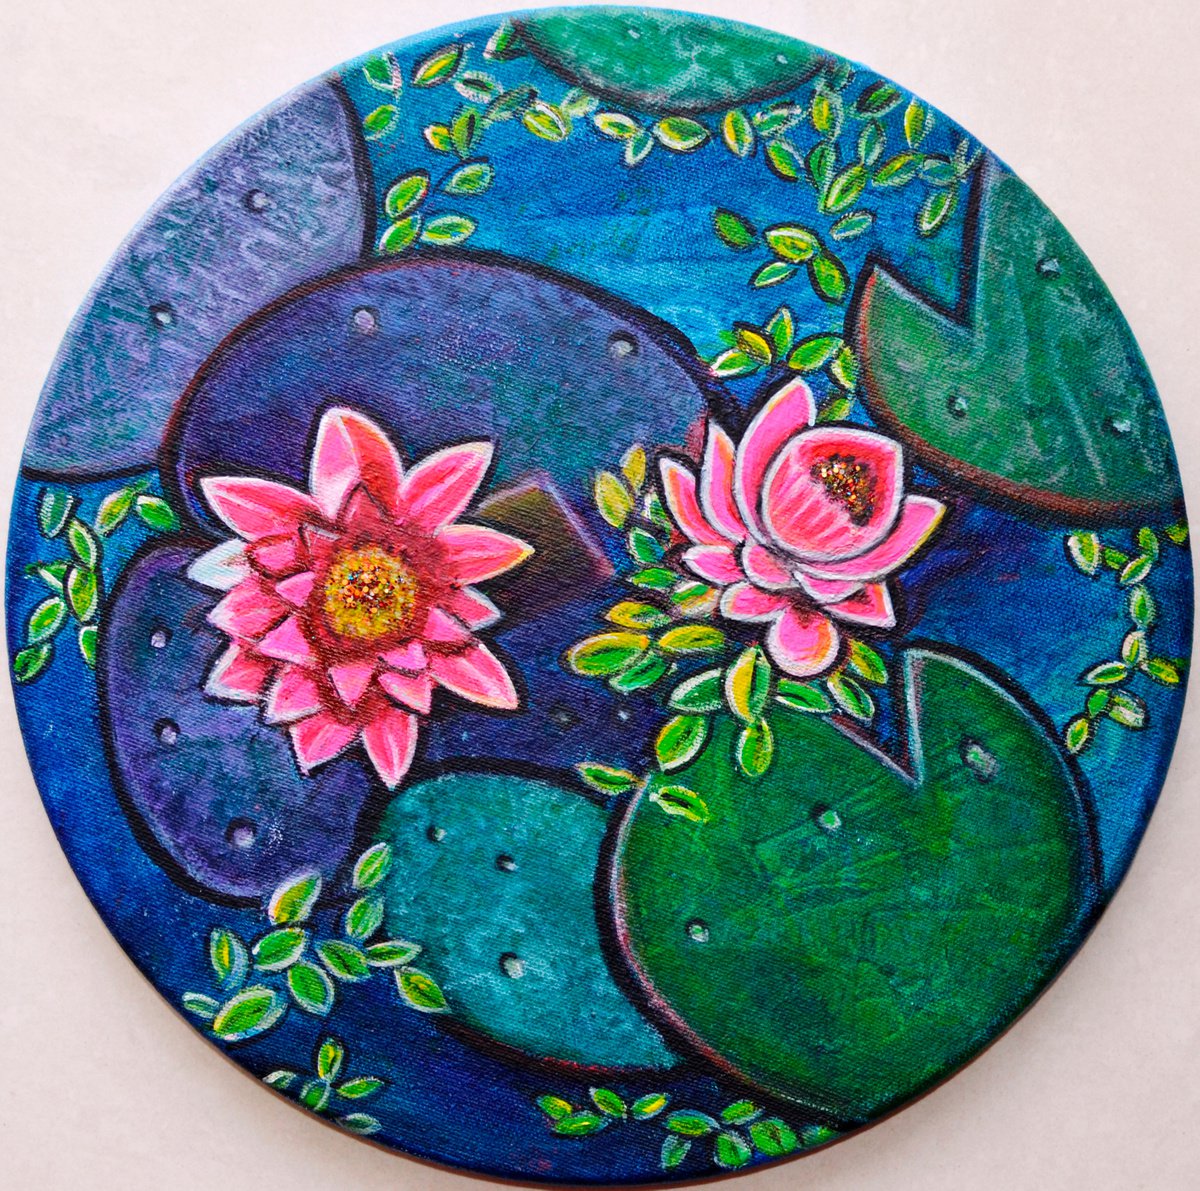 Waterlily pond floral textured painting on round canvas by Manjiri Kanvinde